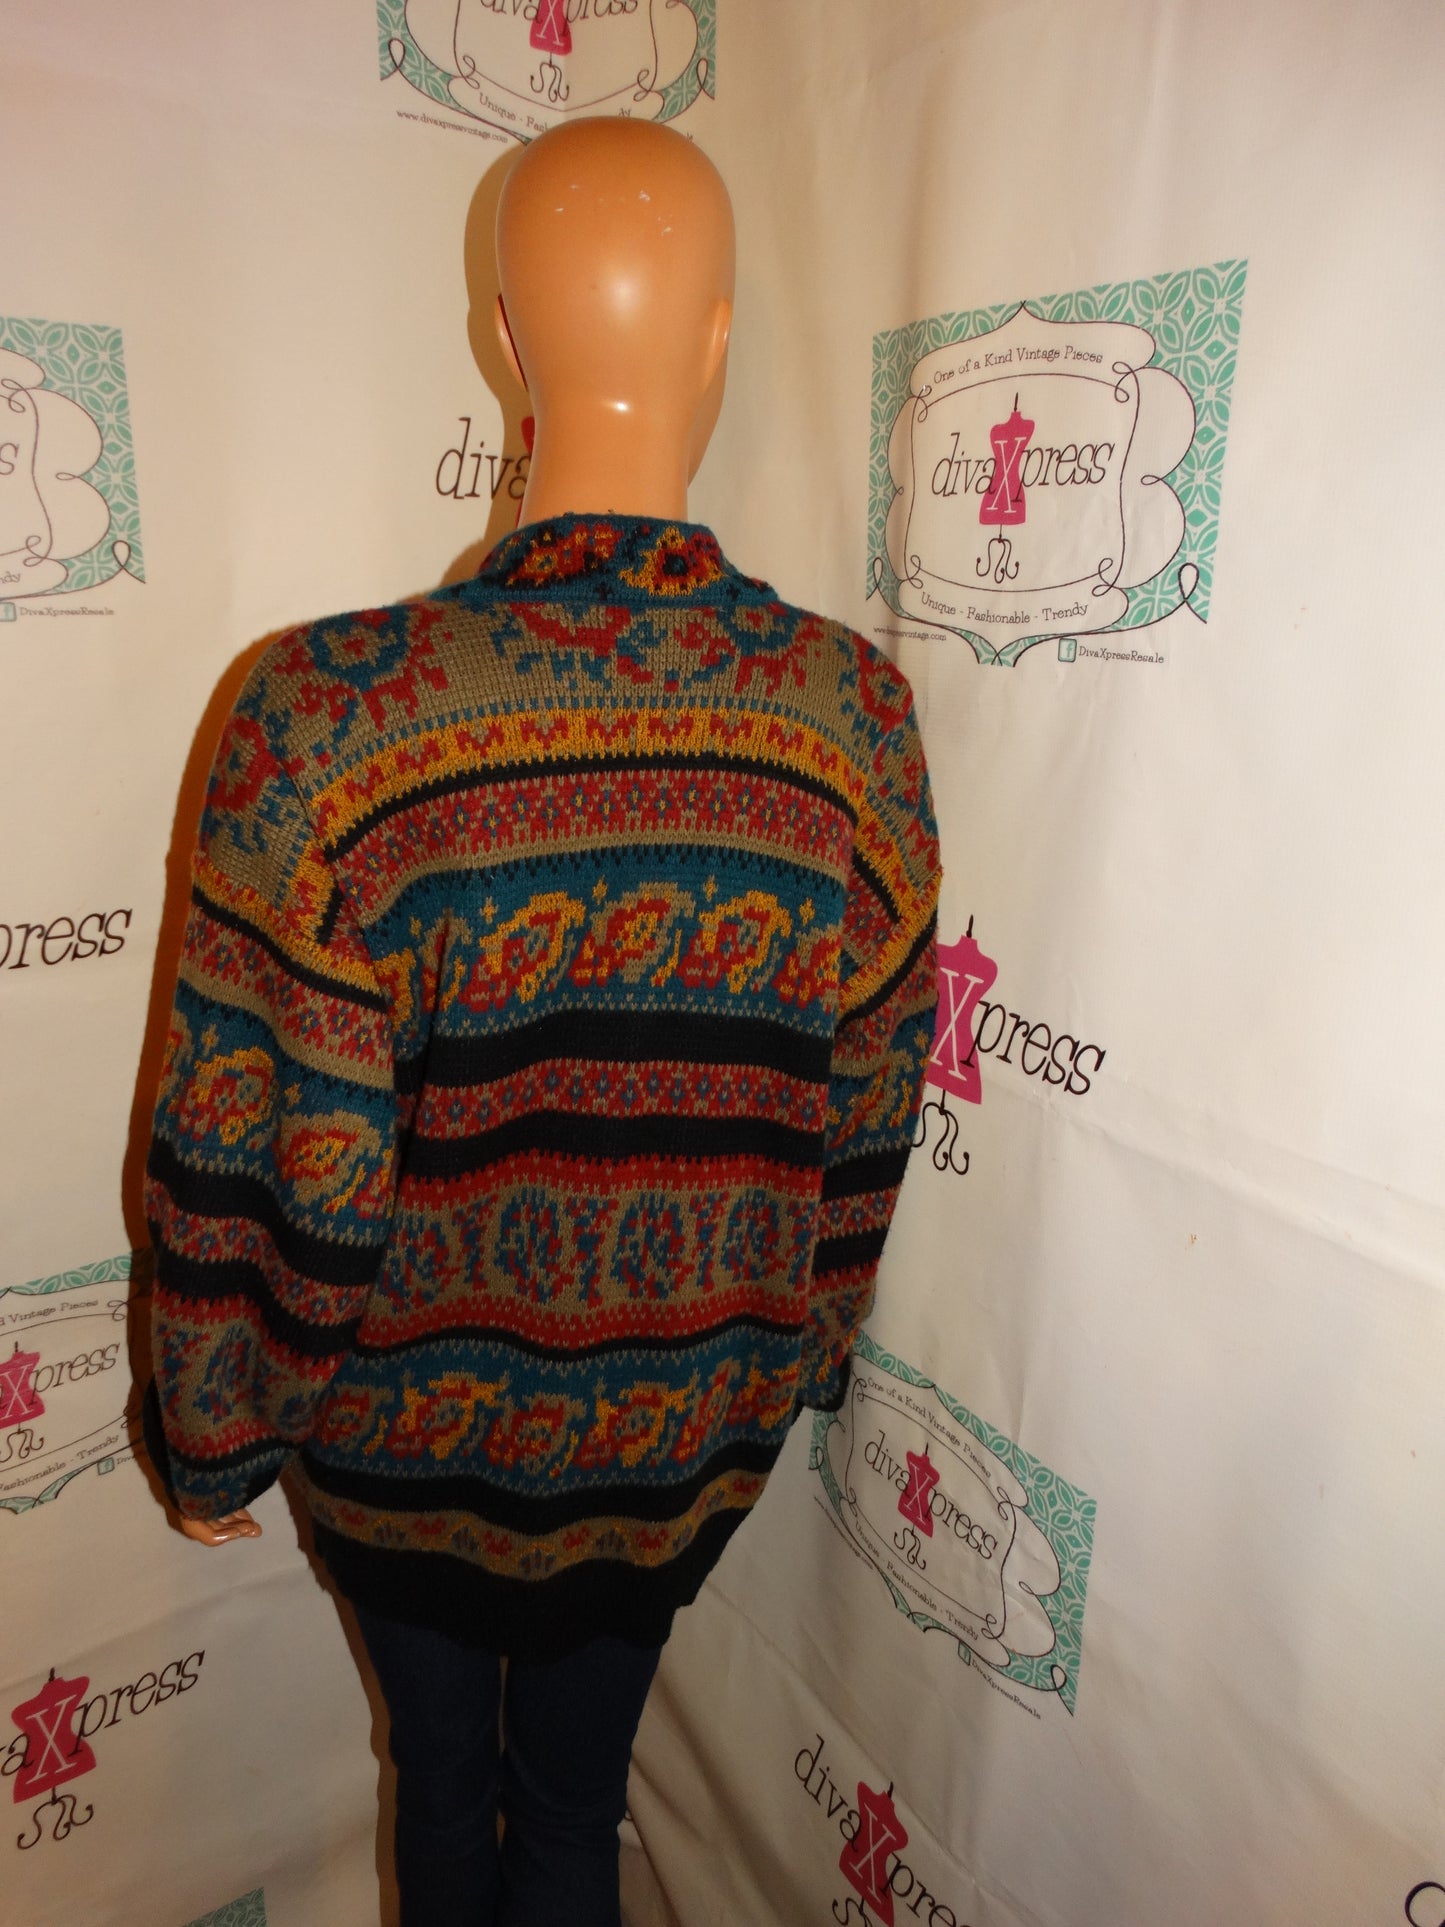 Vintage Zeppelin Green/Tan Colorful Cardigan Sweater Size 1x